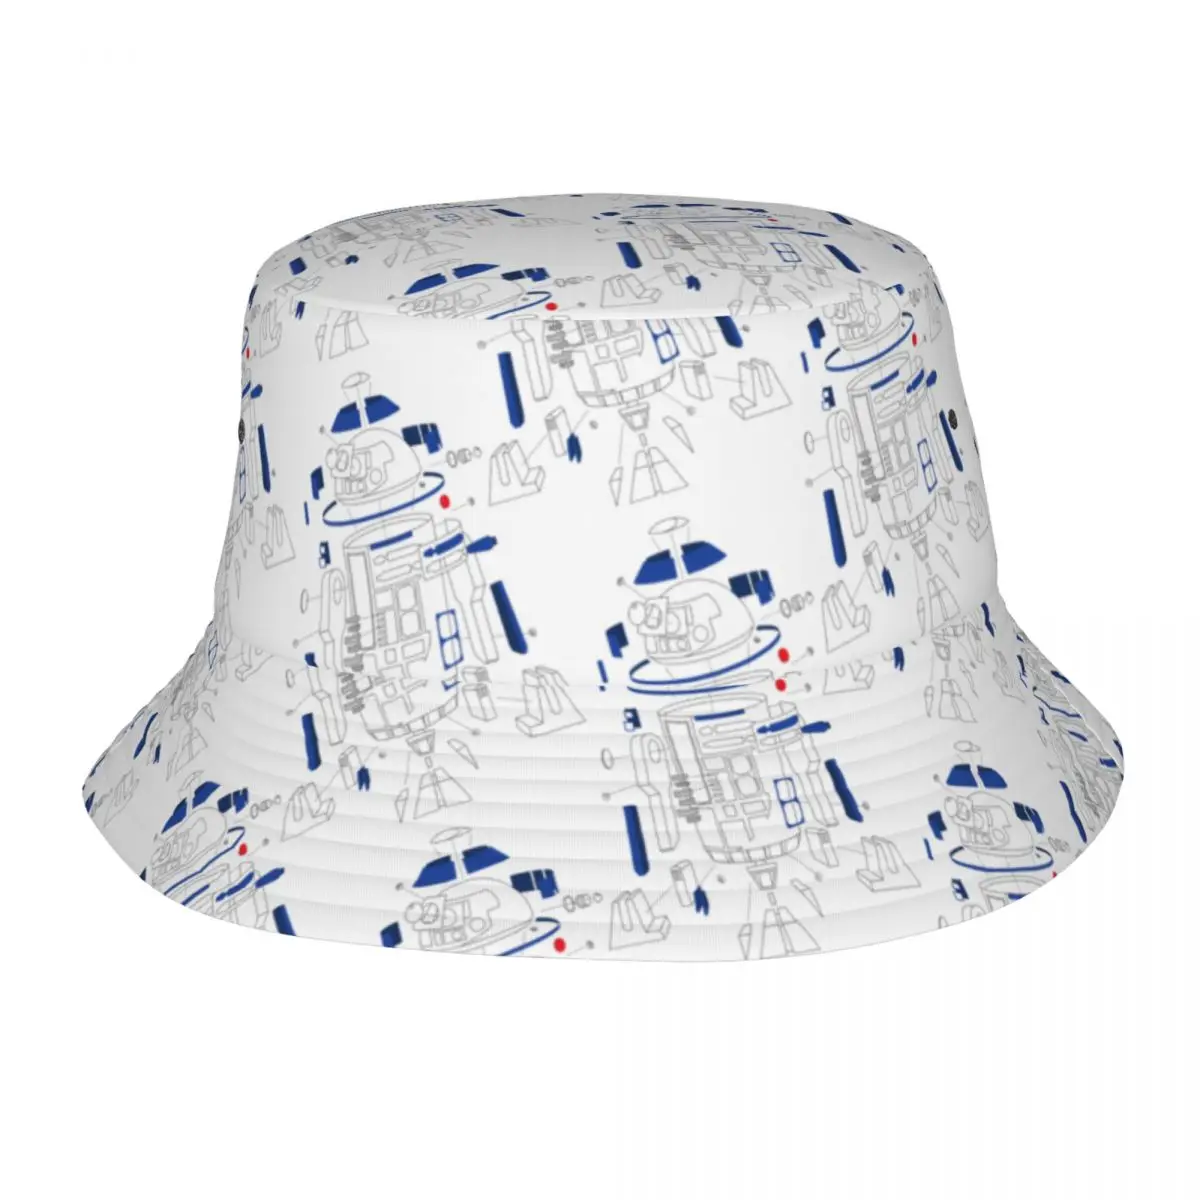 

Disney R2D2 Exploded View Bucket Hat for Teen Summer Vocation Floppy Hat Stylish for Outdoor Sport Fishing Hats Session Hats